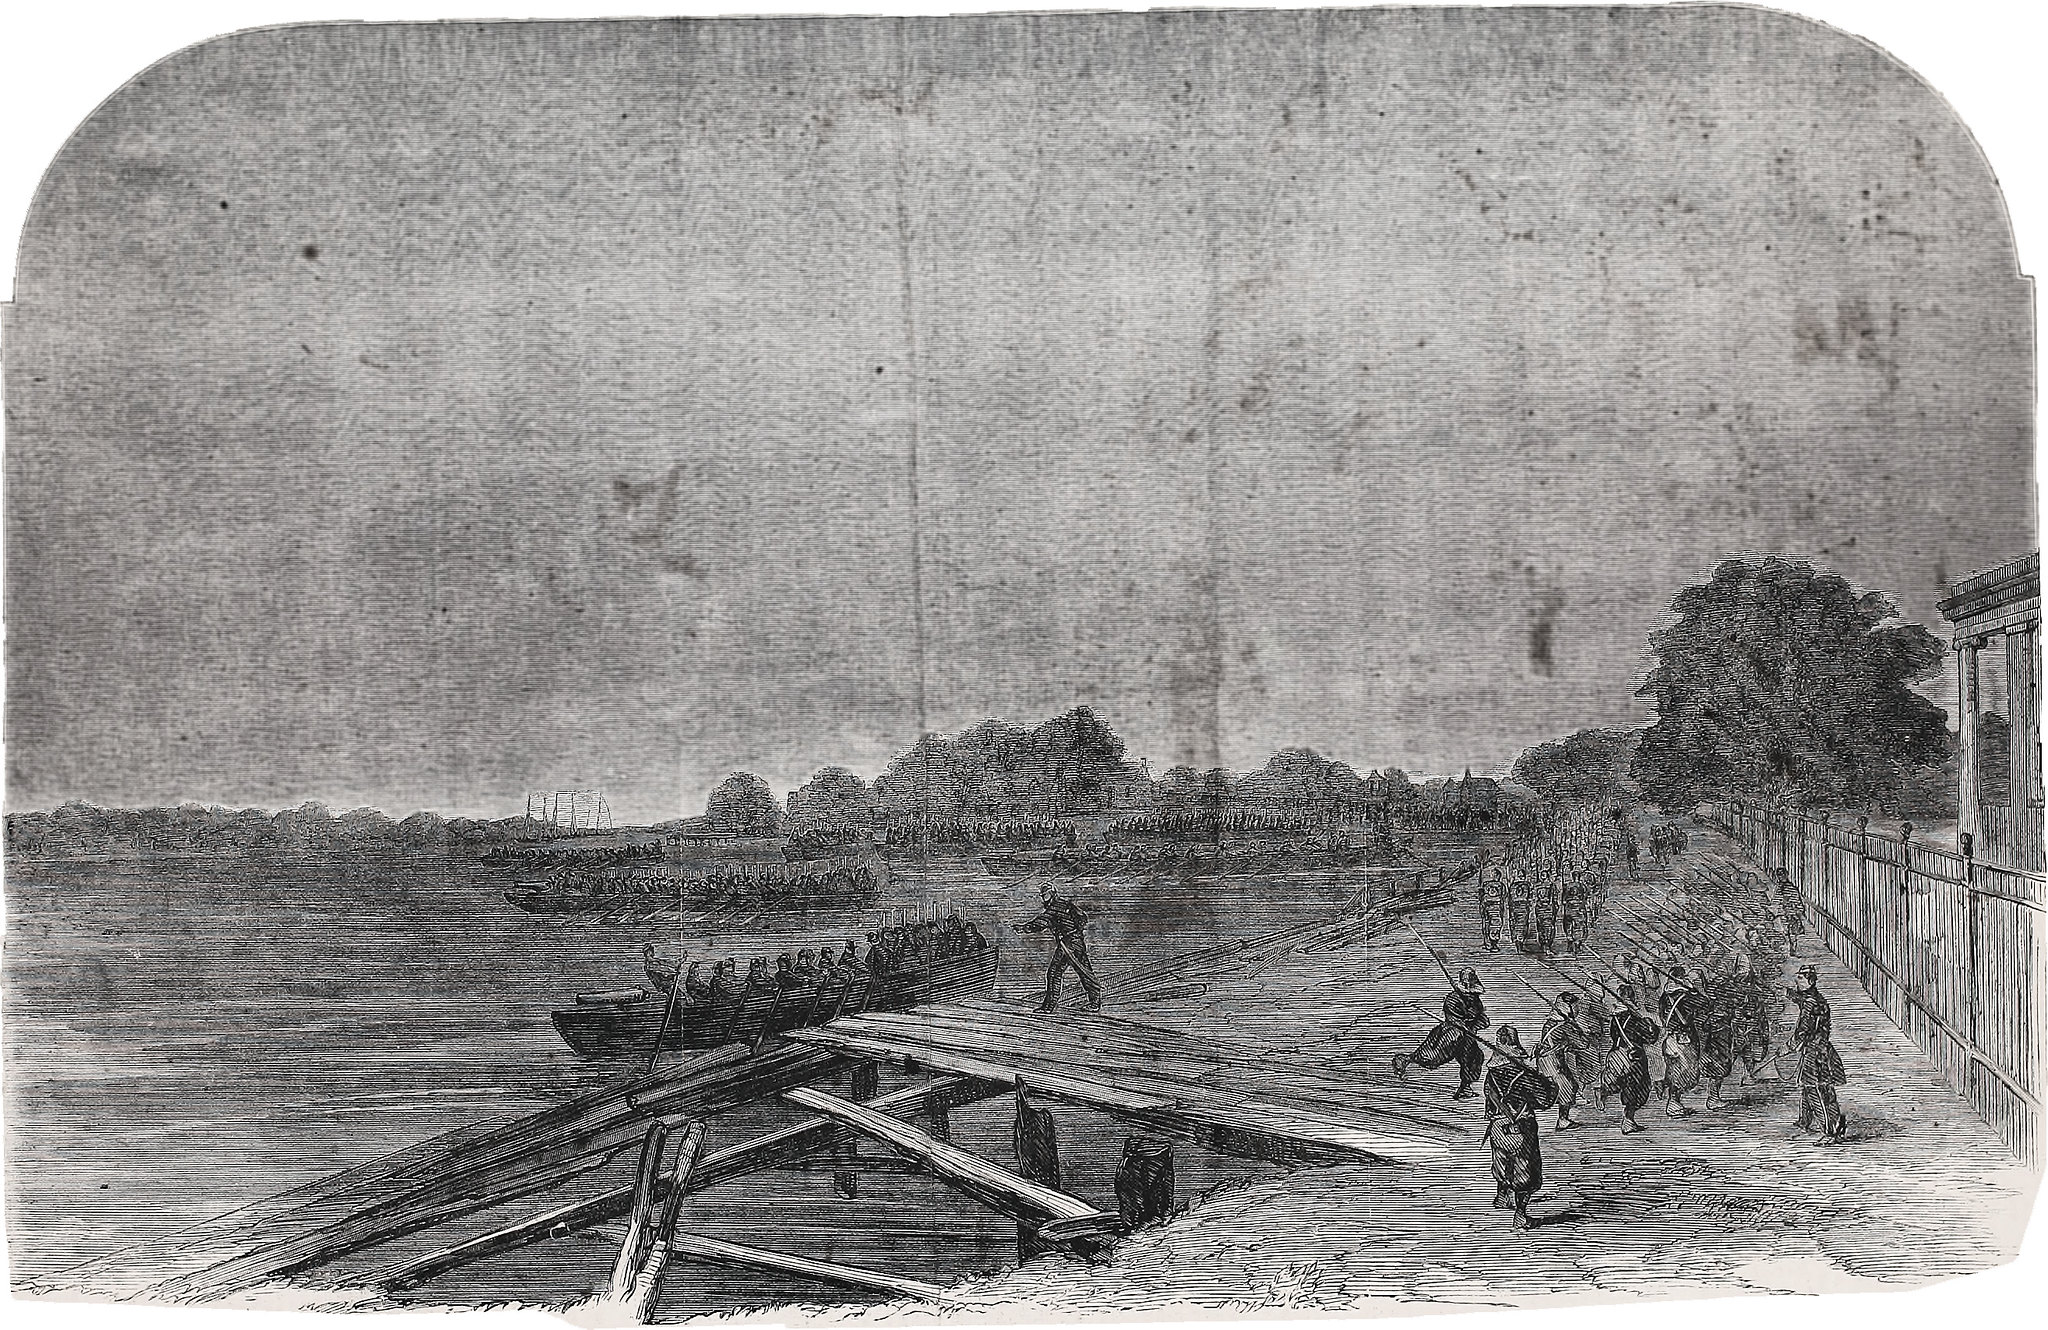 Colonel Duryea's Zouave Regiment Ferried over Hampton Creek by the Naval Brigade on the 10th of June (1861), en route to Attack the Secession Forces at Little Bethel, Va. 